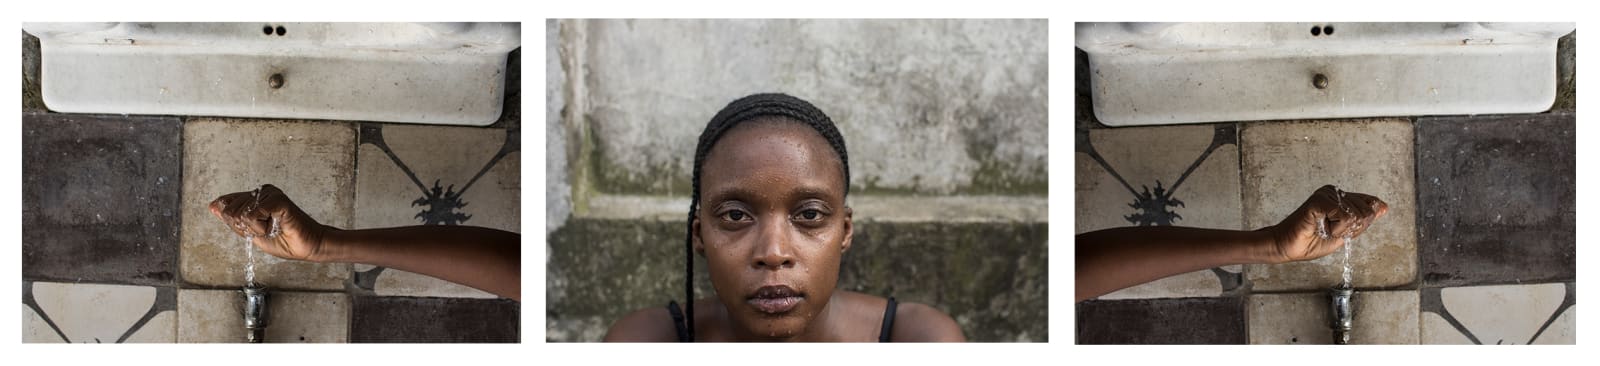 Adama Delphine Fawundu, Water Spirit, Don't Cry for me Argentina, Triptych, 2018